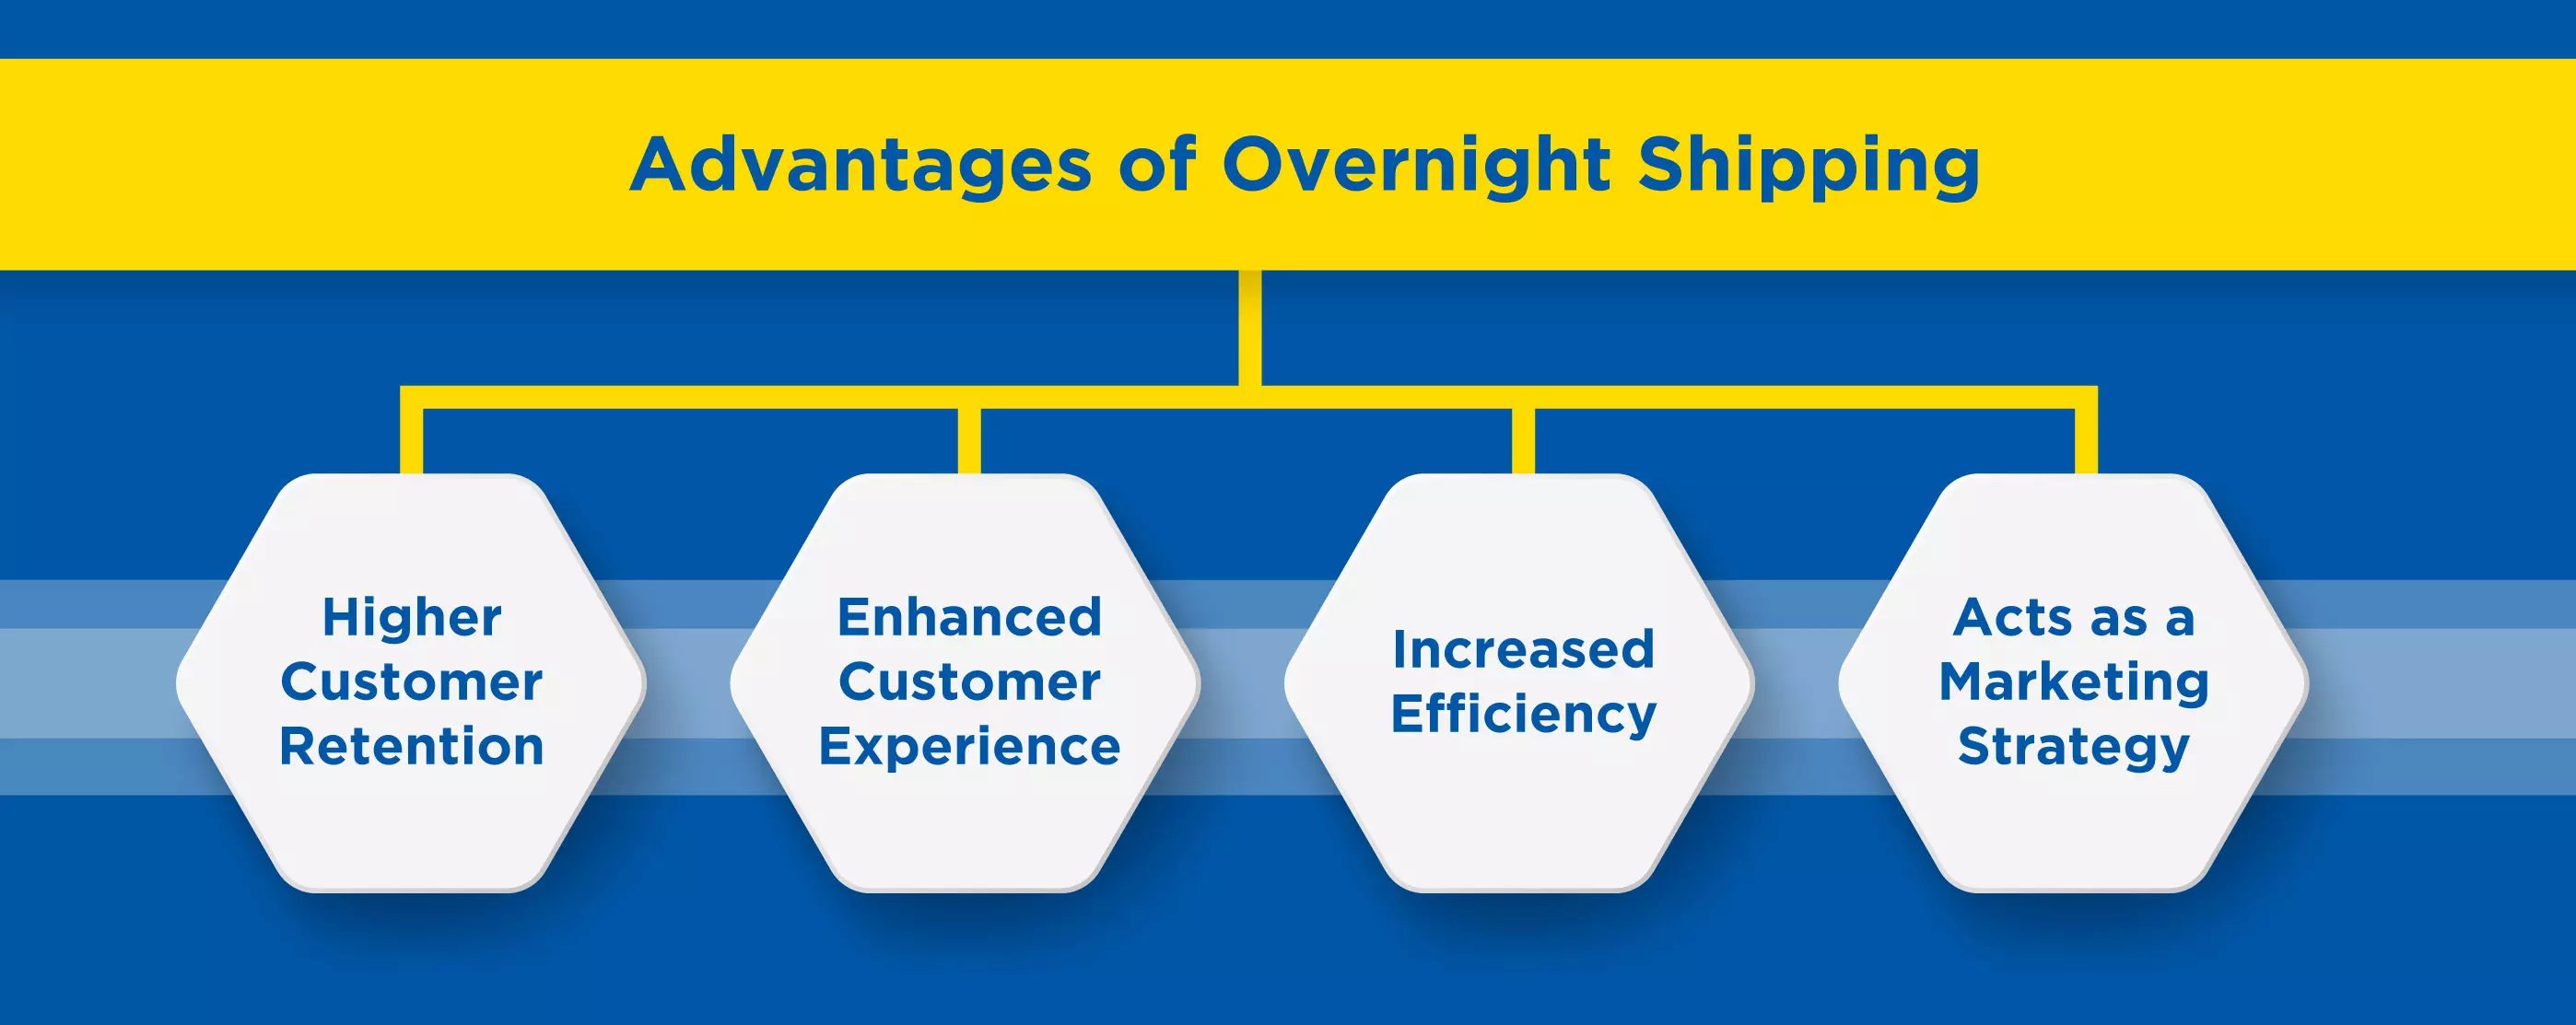 advantages-of-overnight-shipping